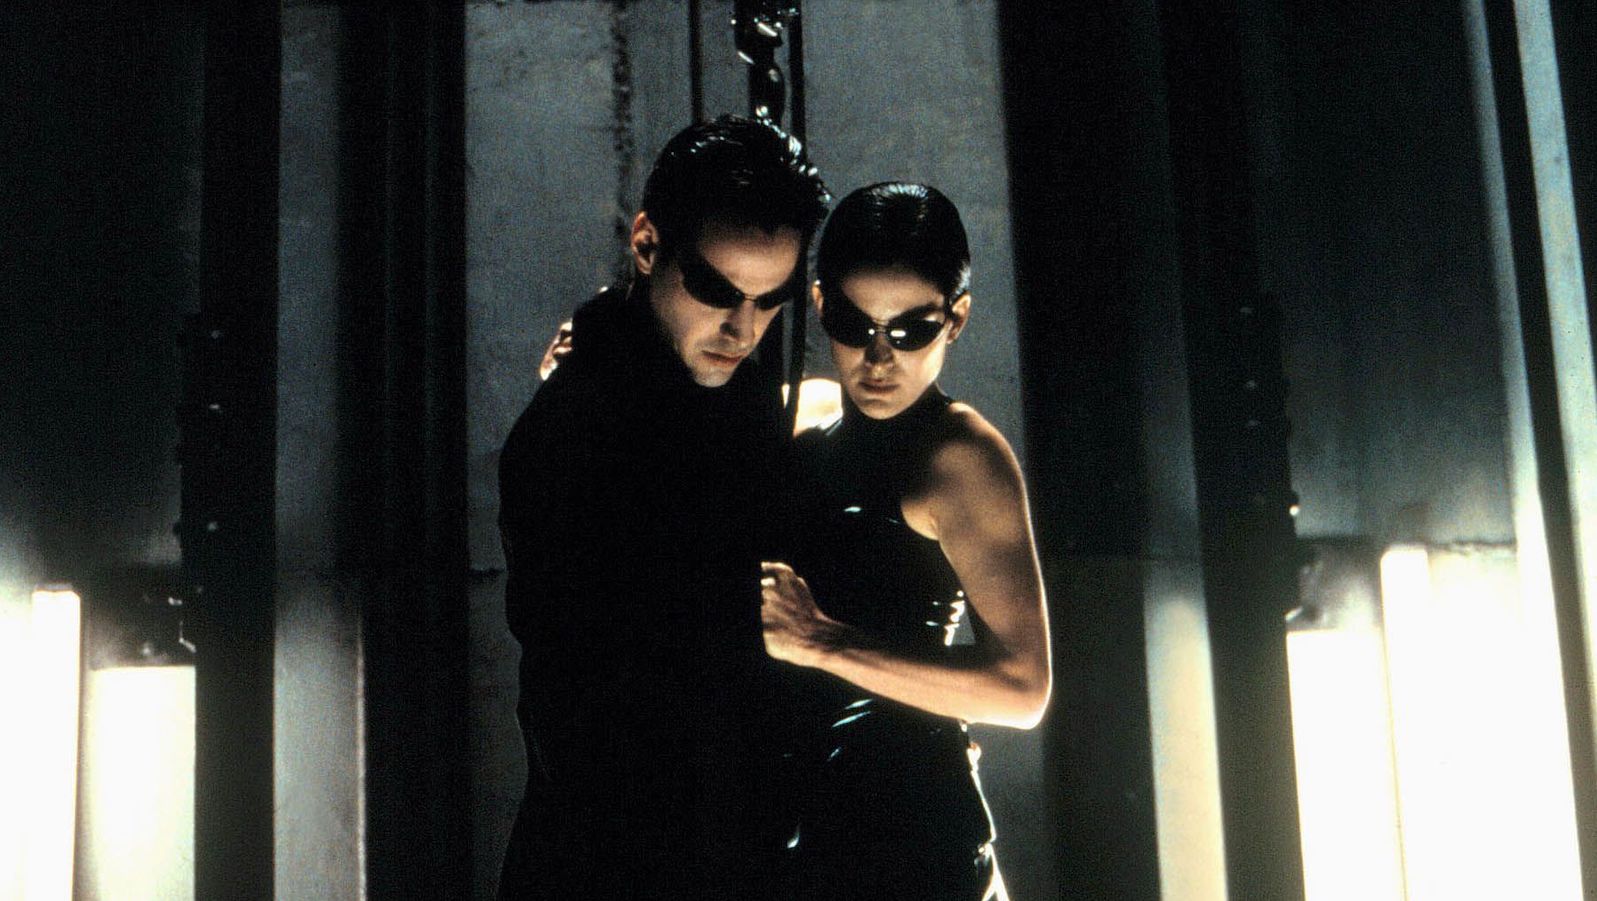 A man and woman in sunglasses and wearing leather hold each other and look down.